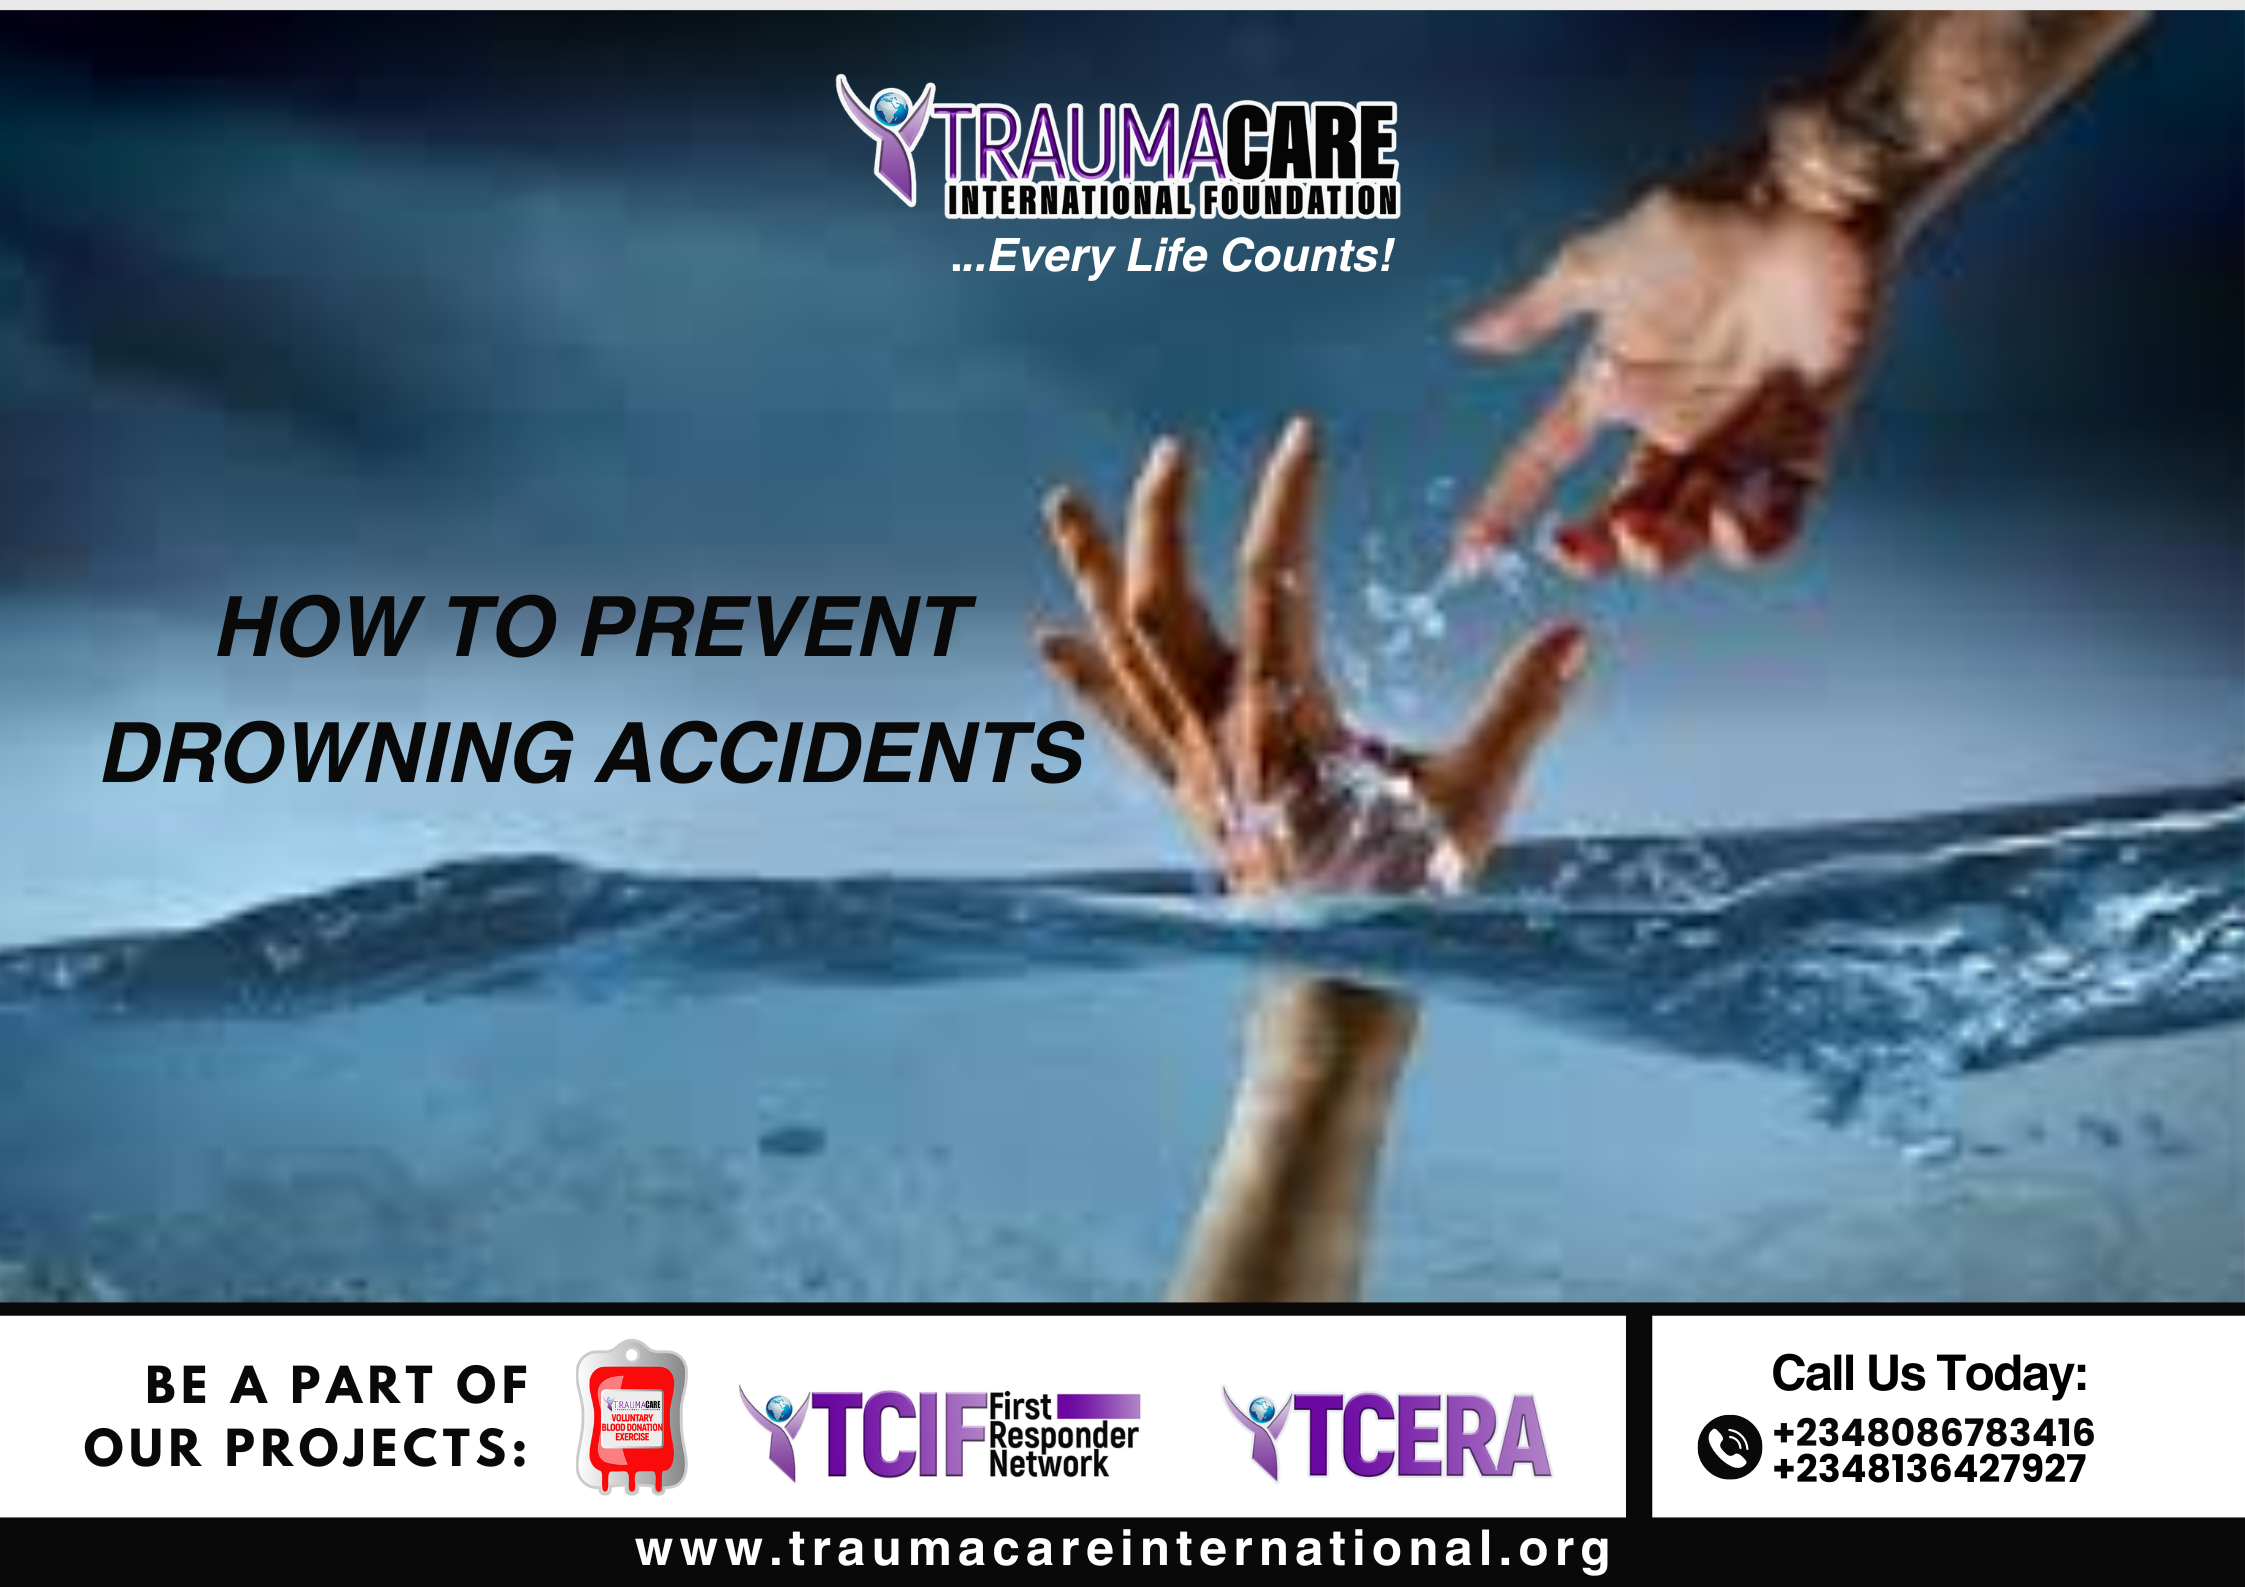 HOW TO PREVENT DROWNING ACCIDENTS